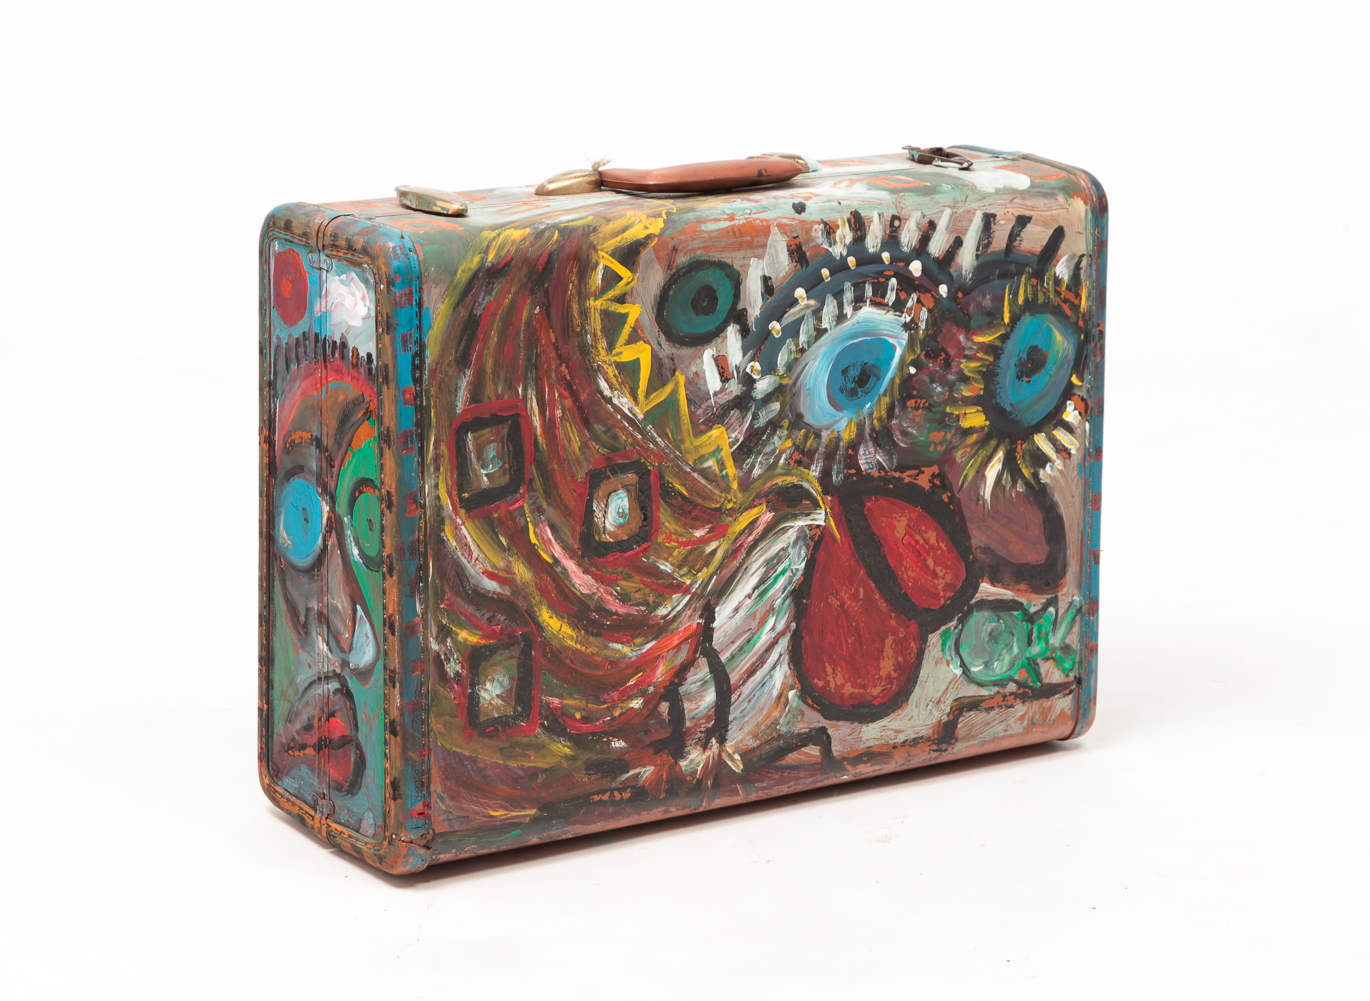 ROBERT WRIGHT PAINTED SUITCASE  2dfba4